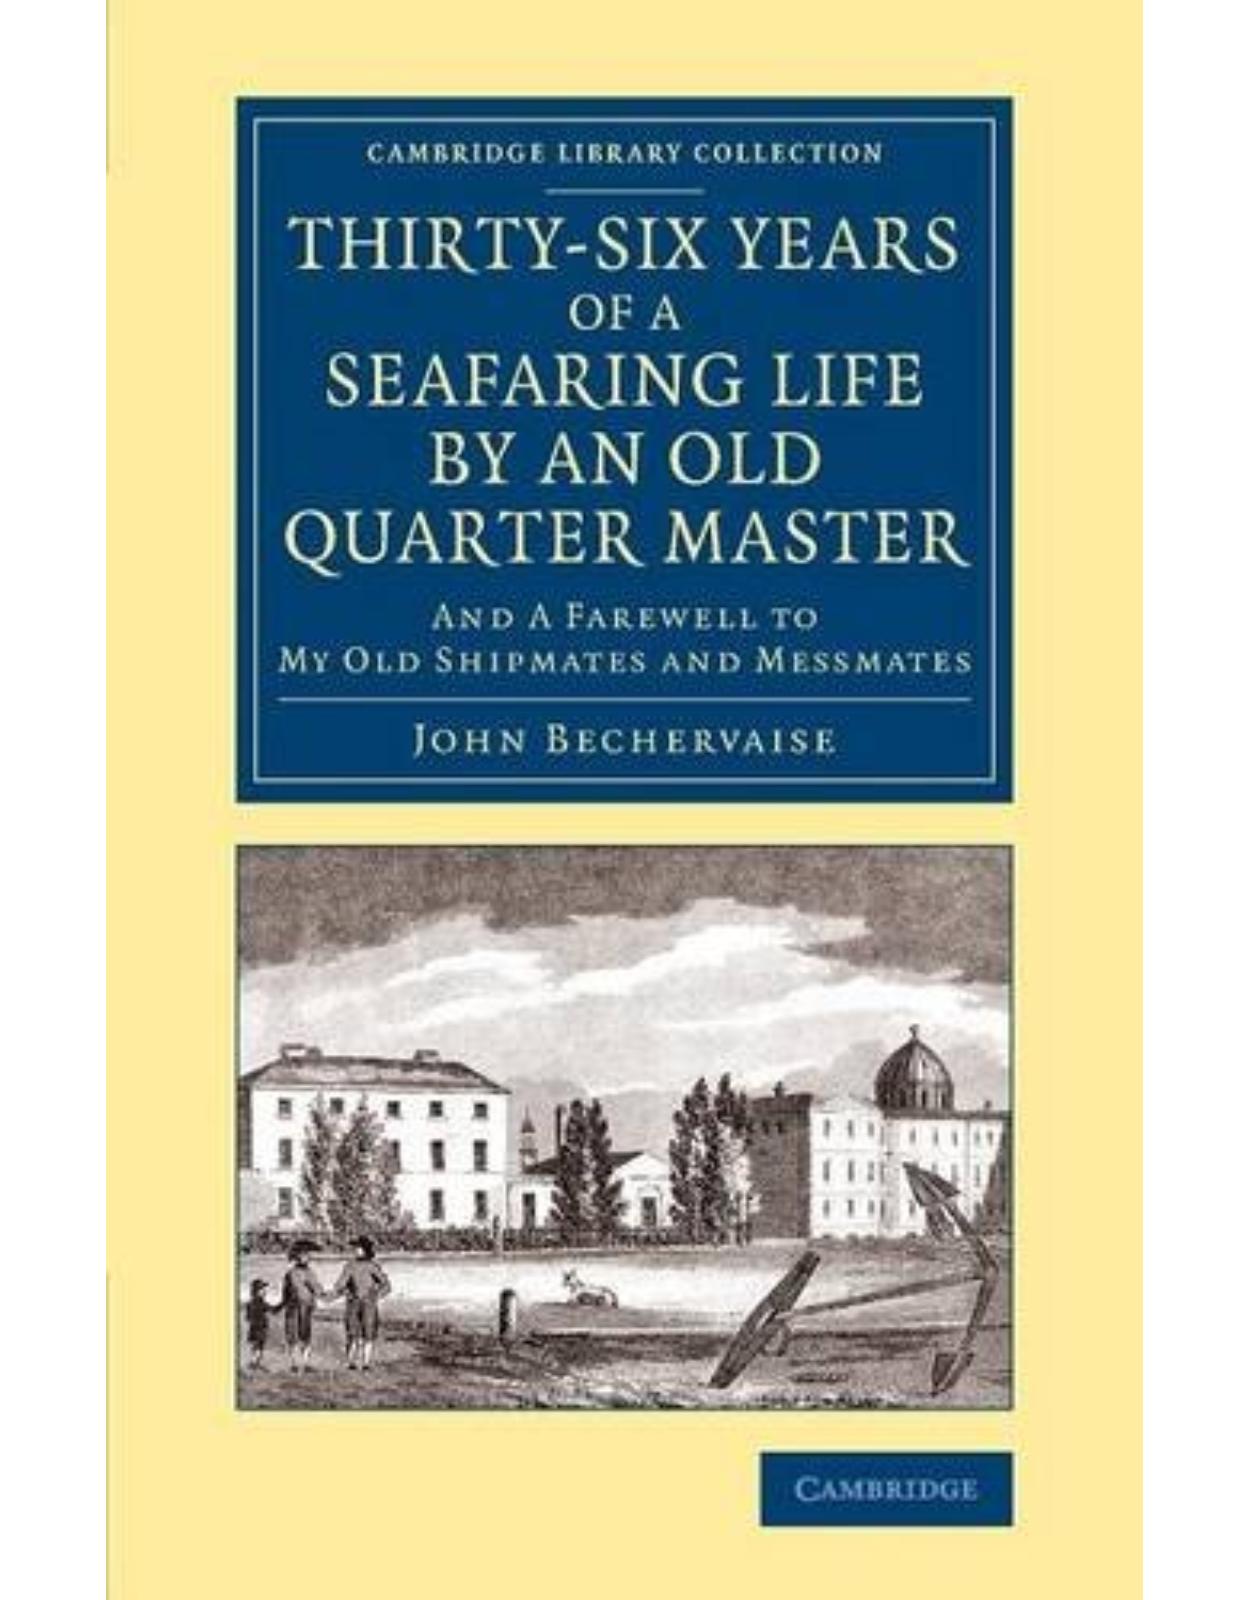 Thirty-Six Years of a Seafaring Life by an Old Quarter Master: And Farewell to my Old Shipmates and Messmates (Cambridge Library Collection - Maritime Exploration)